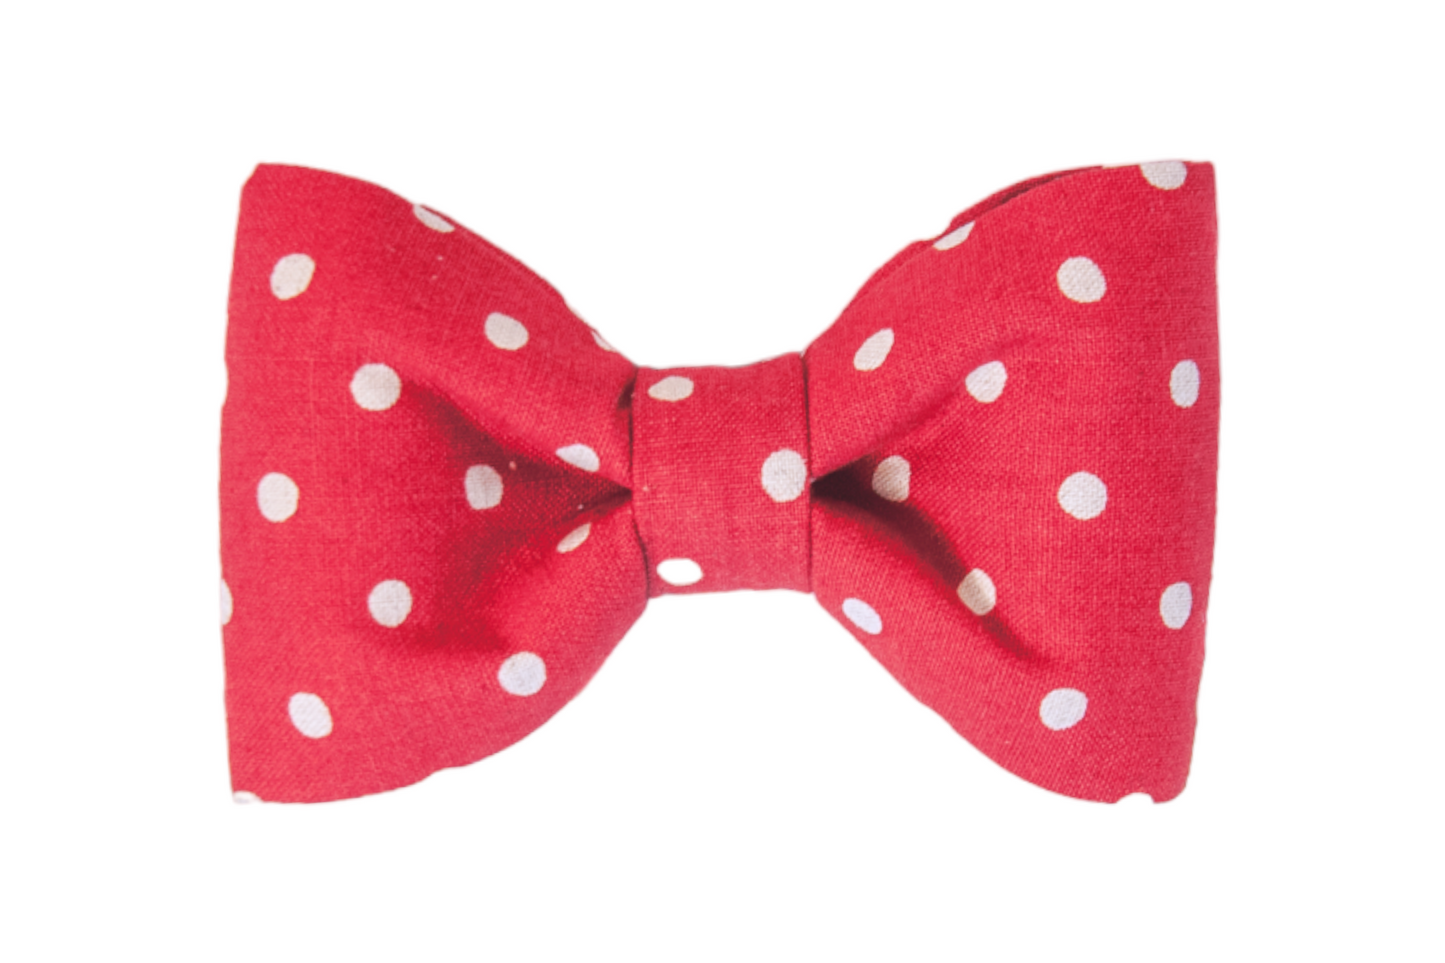 Ivory Dot on Red Bow Tie - Crew LaLa